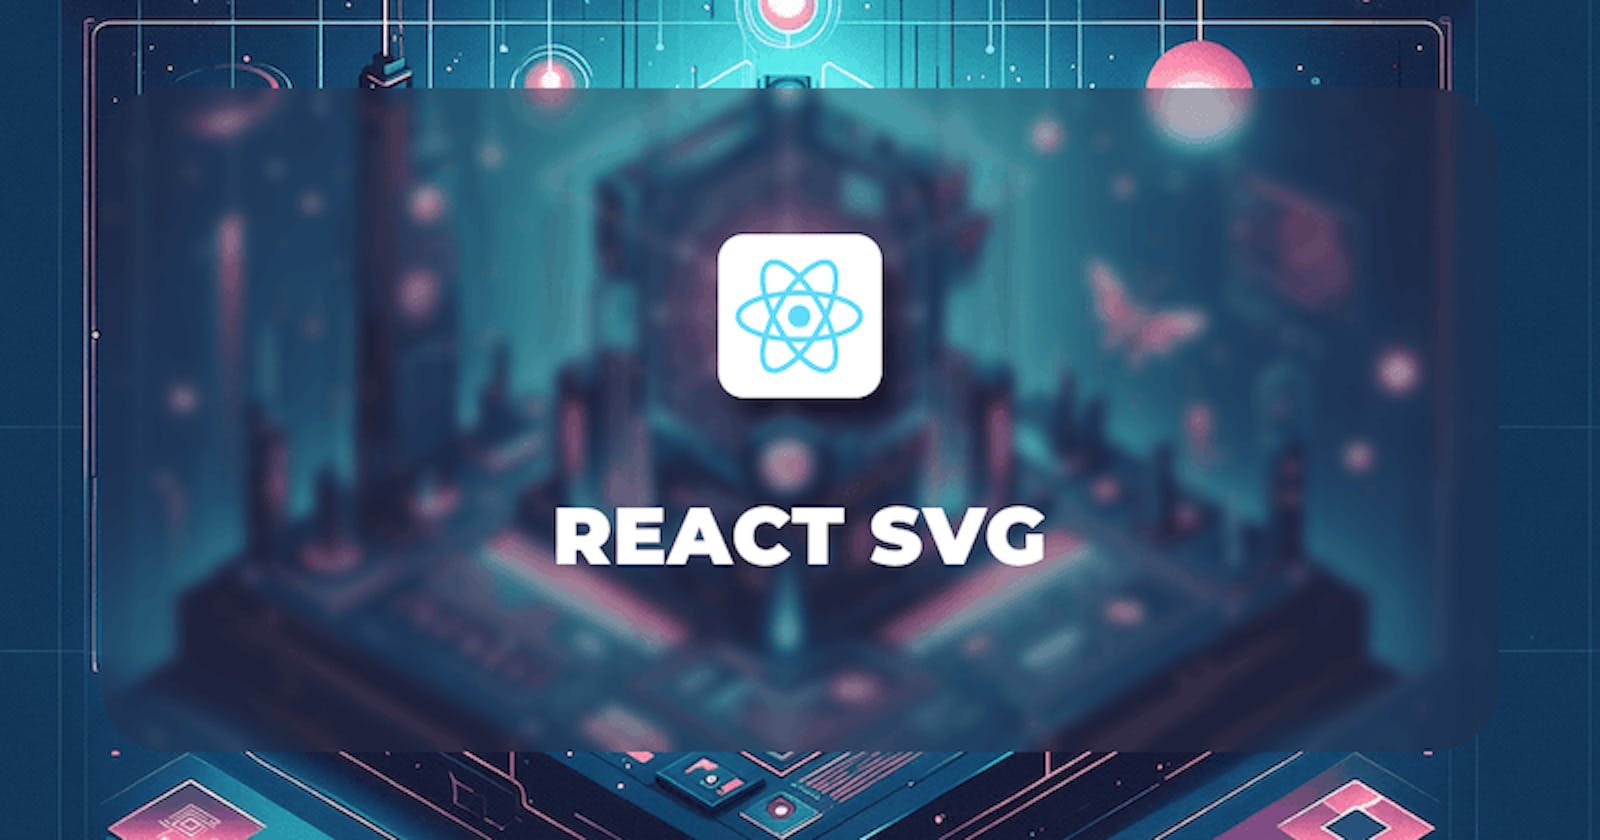 Using SVG in React